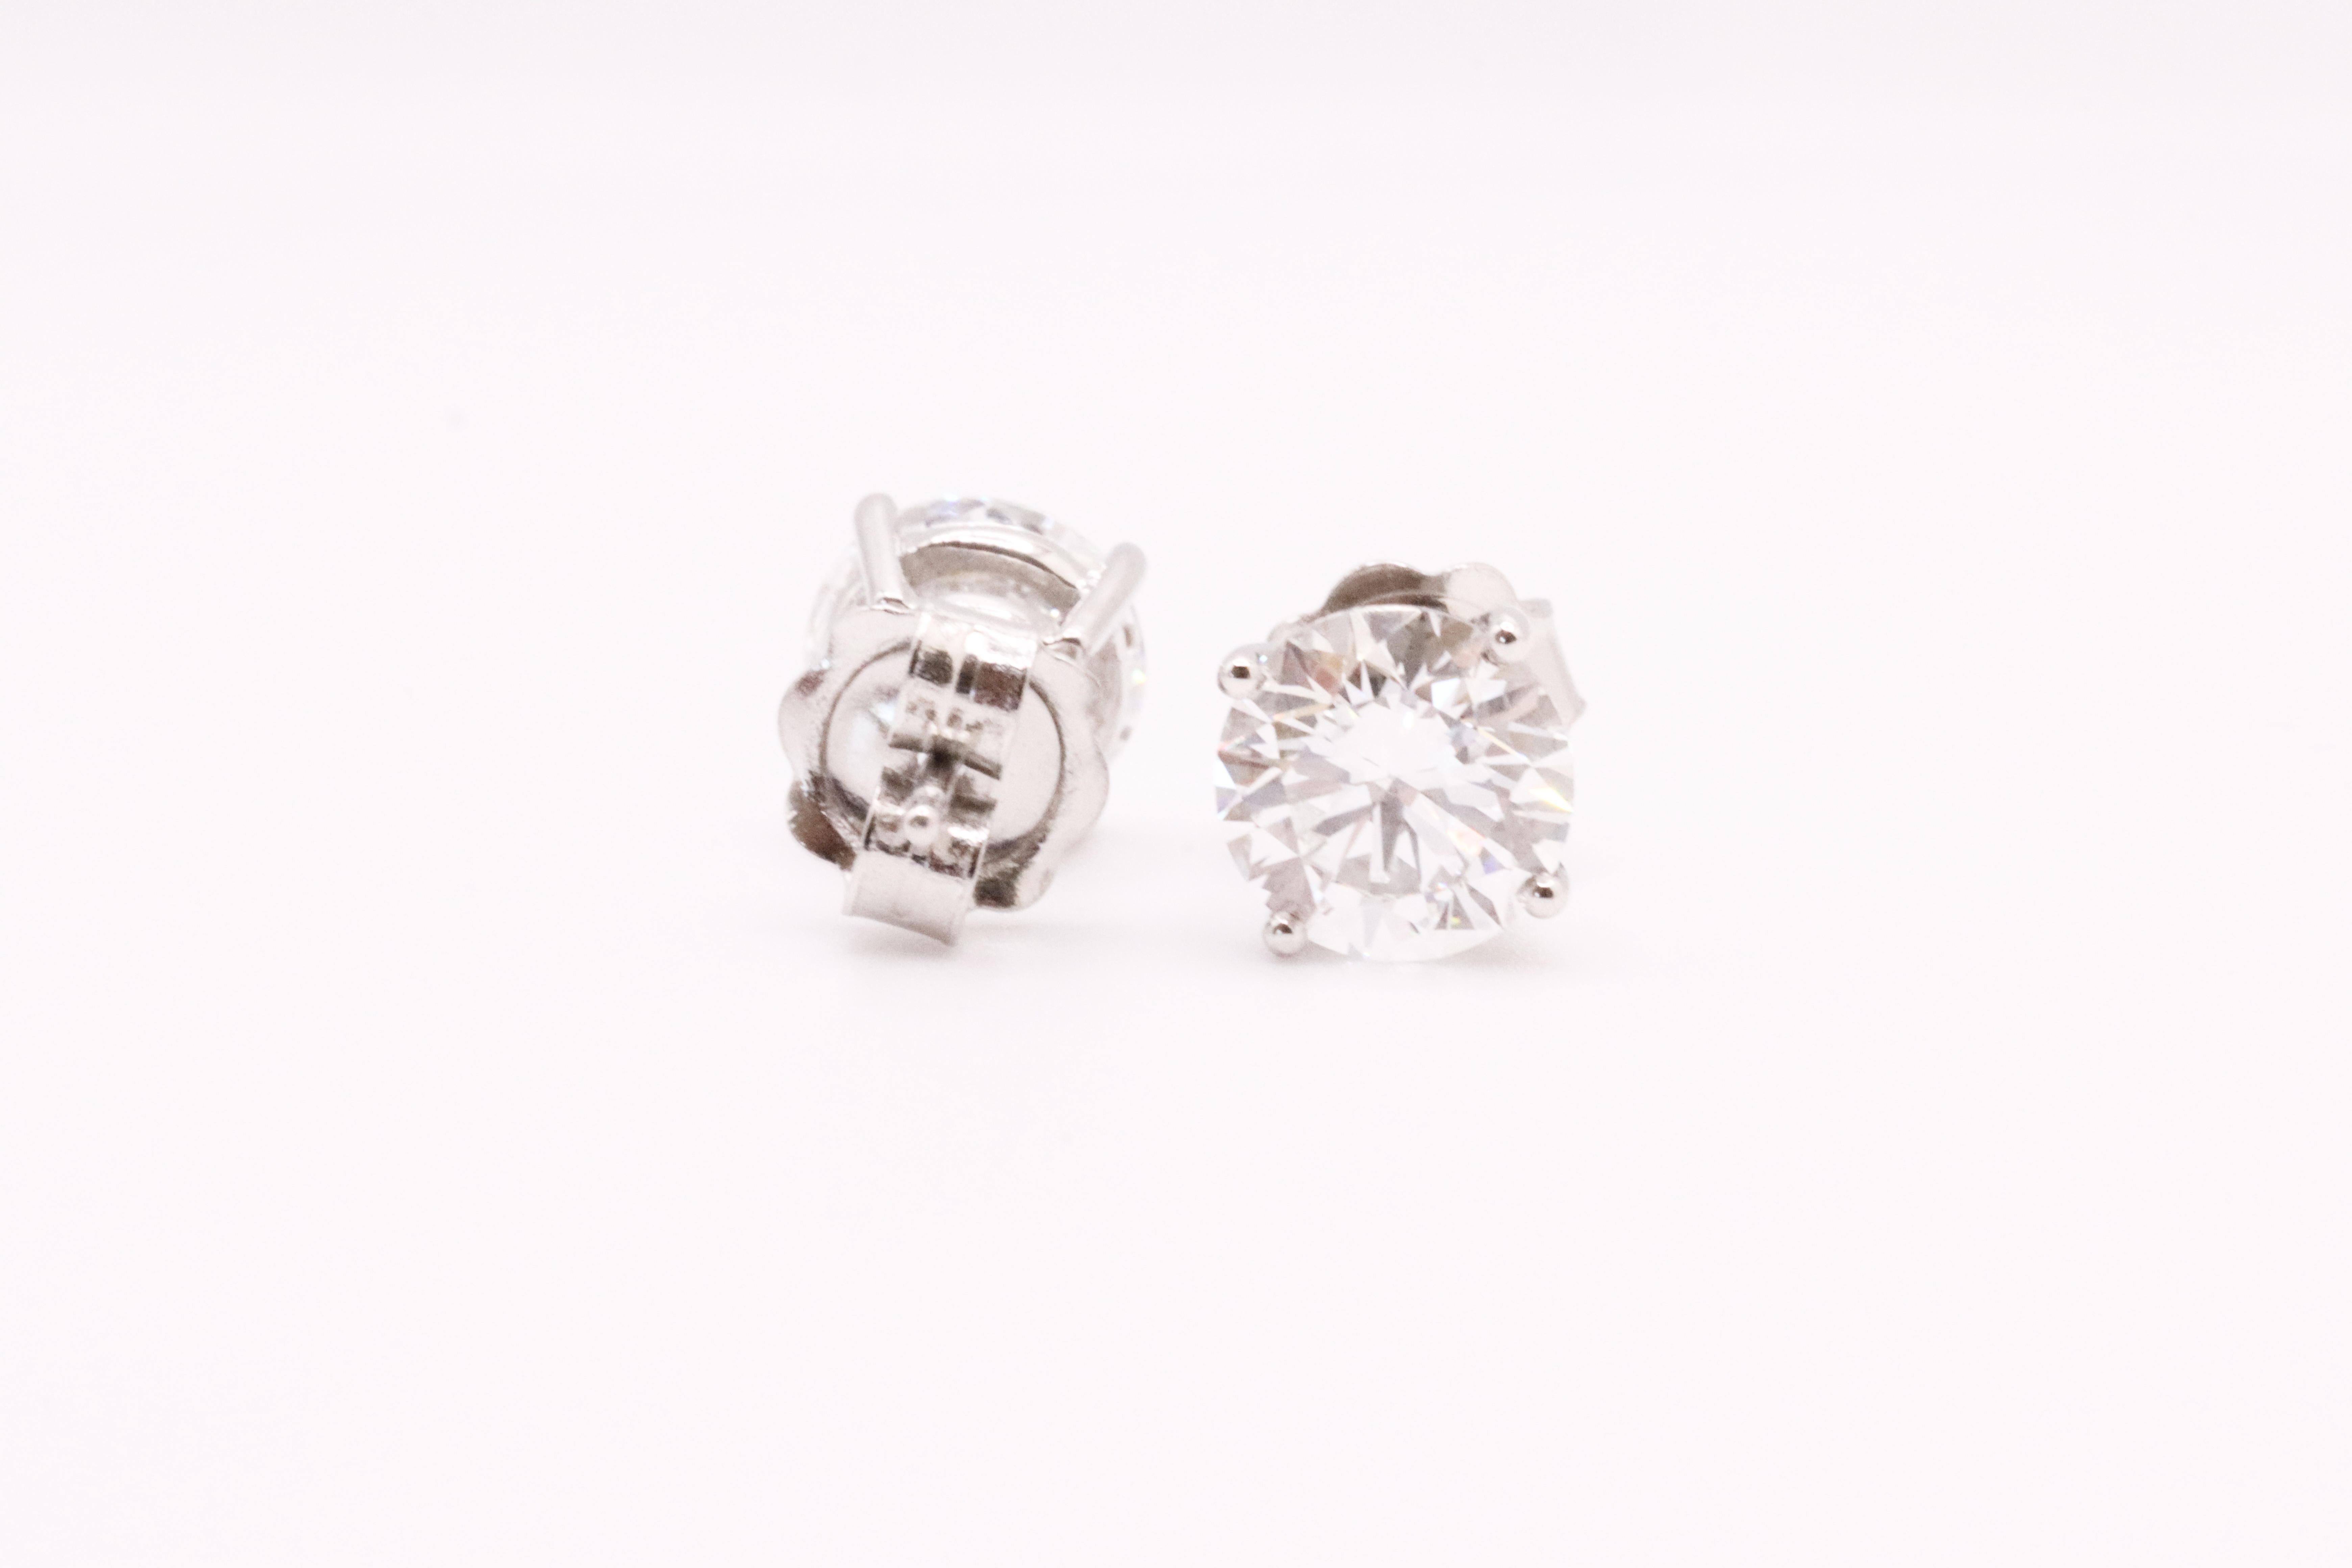 ** ON SALE ** Round Brilliant Cut 2.00 Carat Diamond Earrings Set in 18kt White Gold - F Colour VVS2 - Image 4 of 5